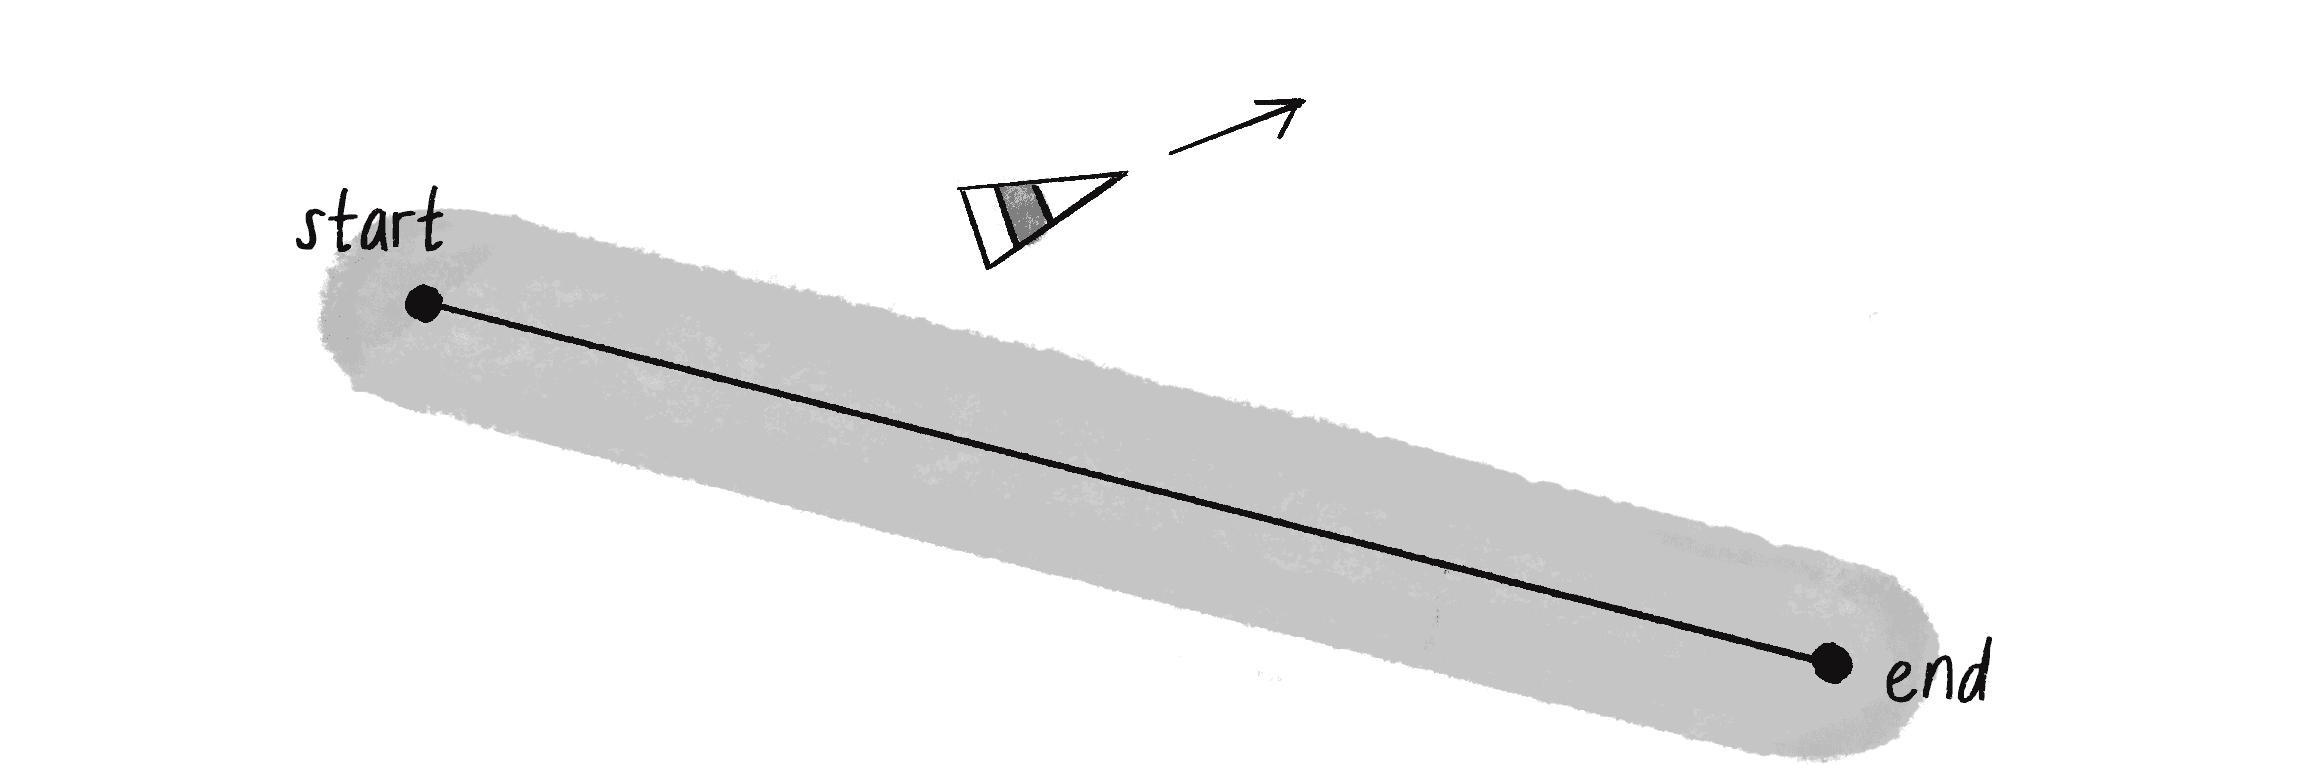 Figure 5.22: Adding a vehicle moving off and away from the path